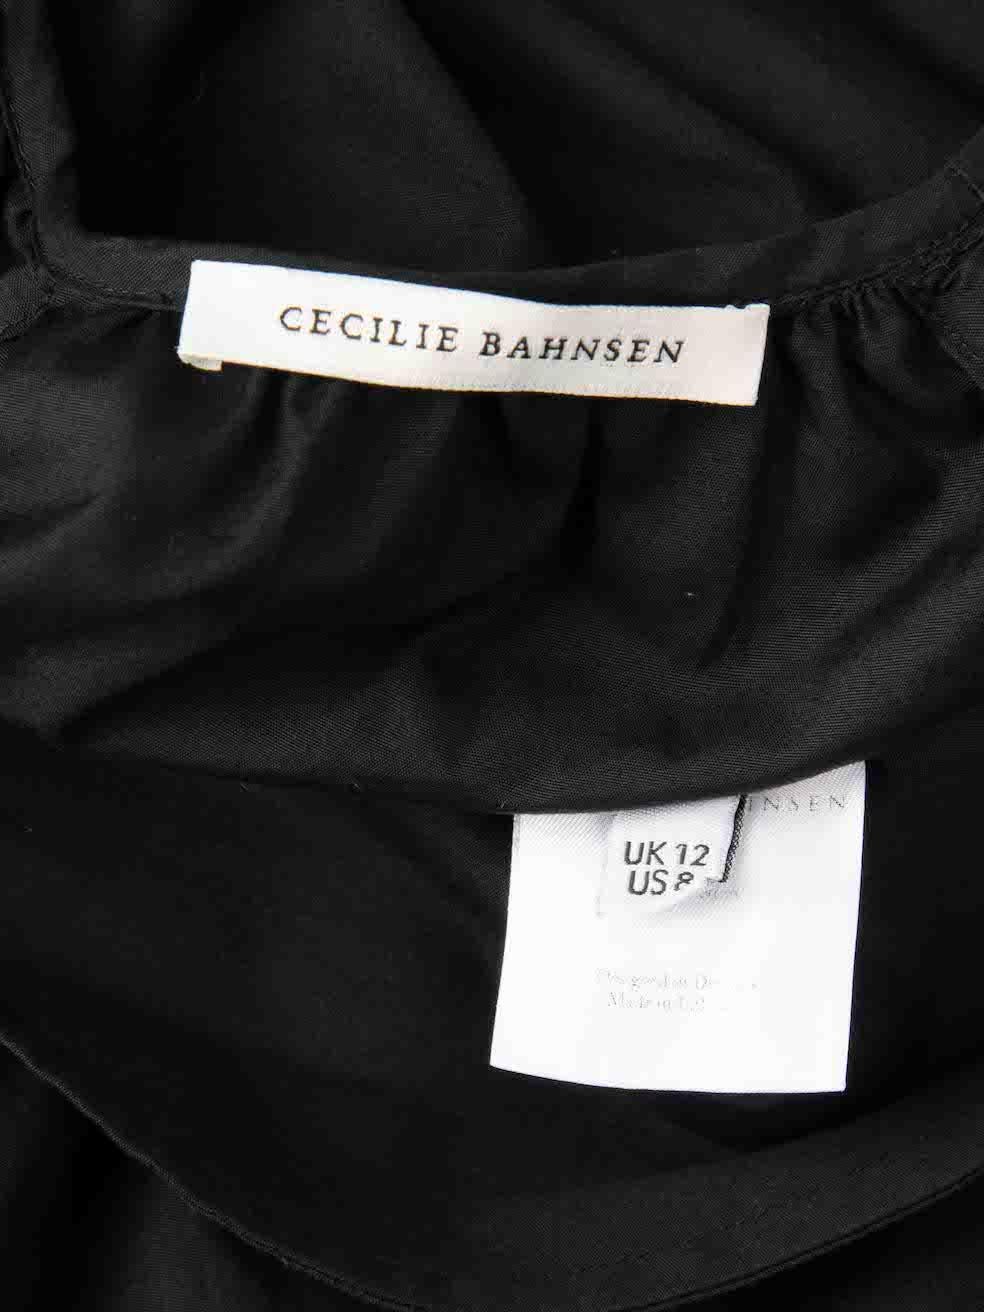 Cecilie Bahnsen Black Puff Sleeves Dress Size L 1